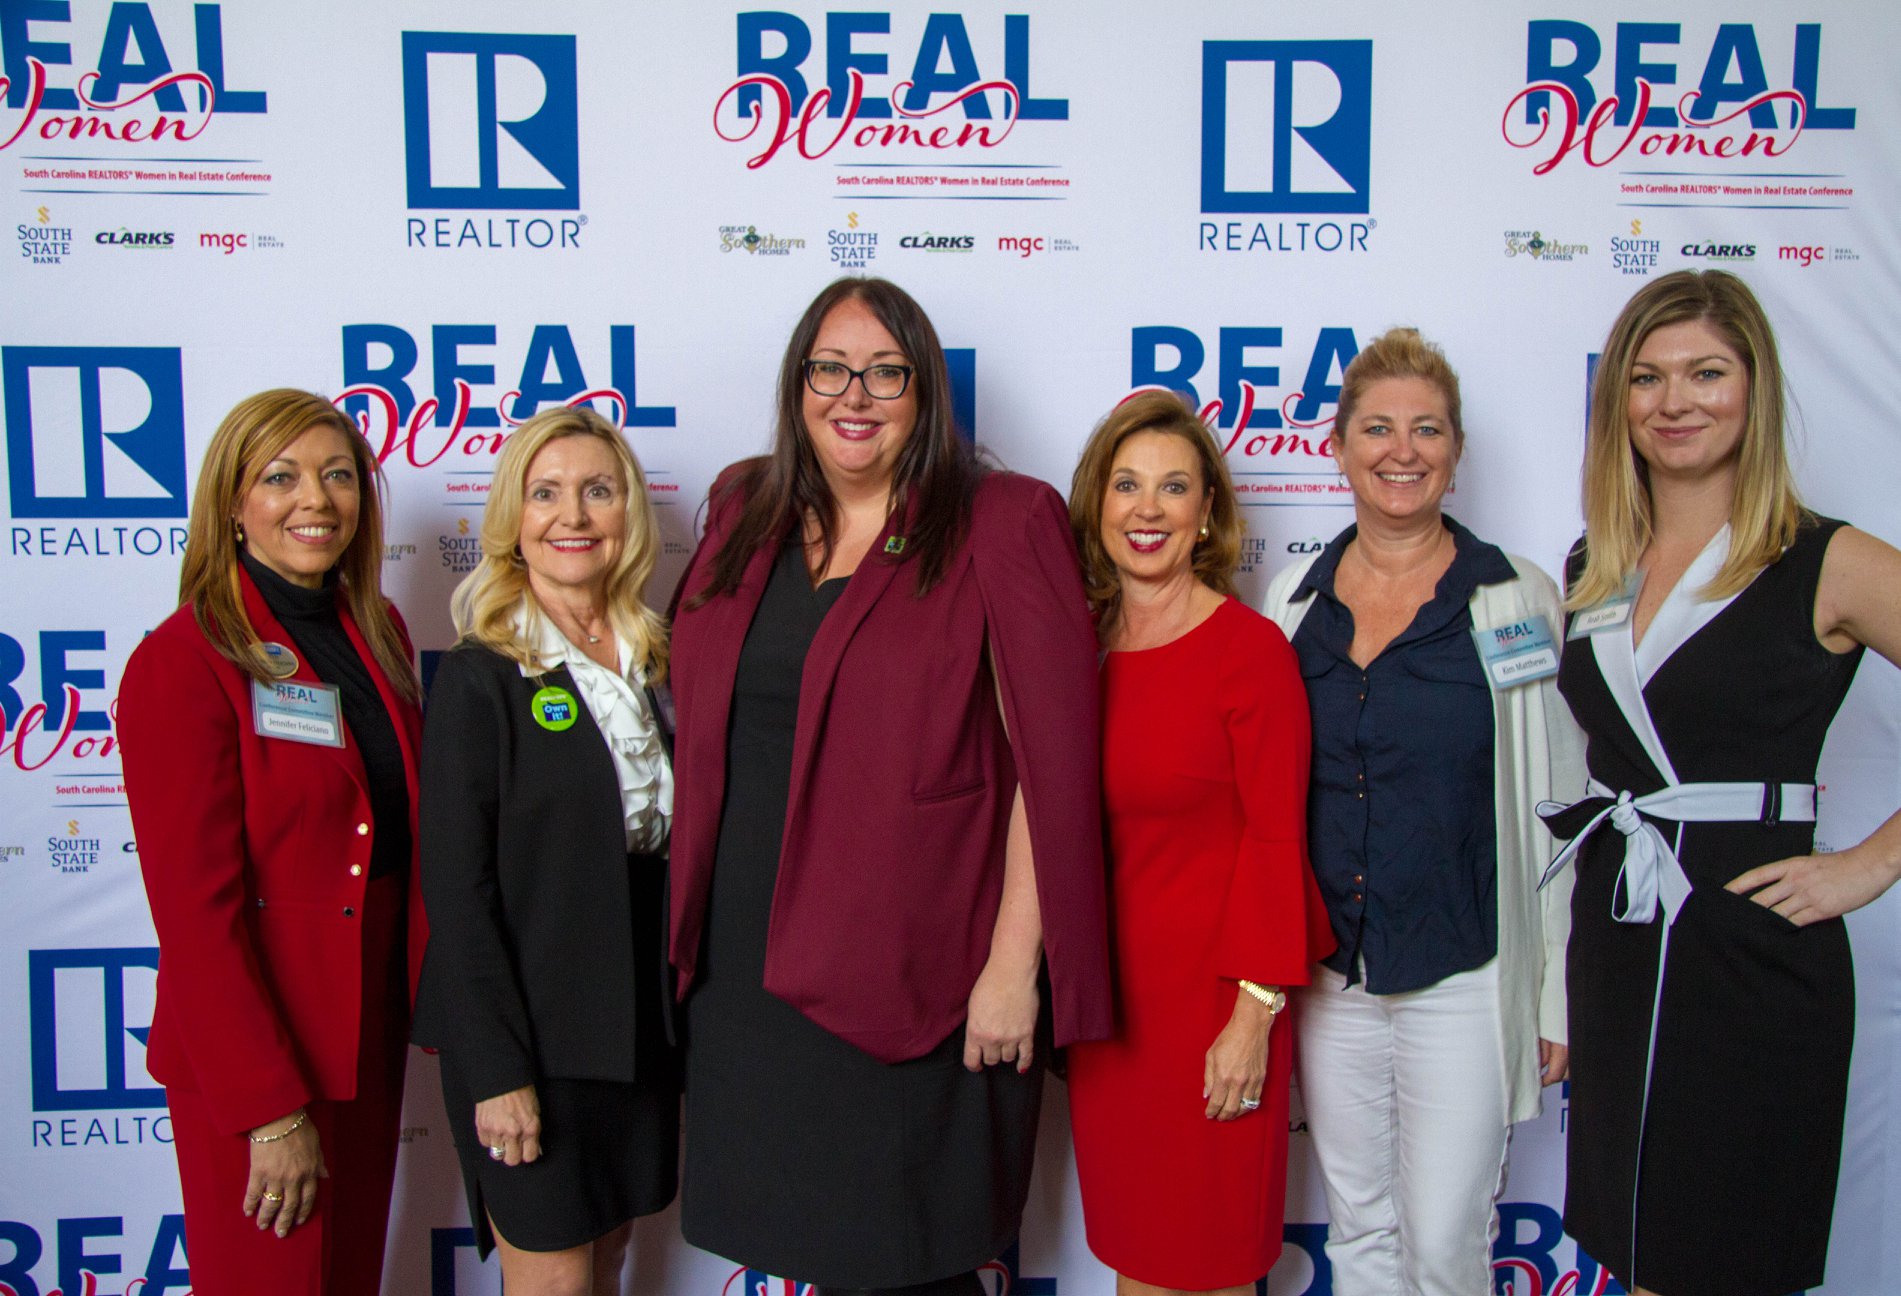 State REALTOR® Associations Launch Women in Real Estate Conferences